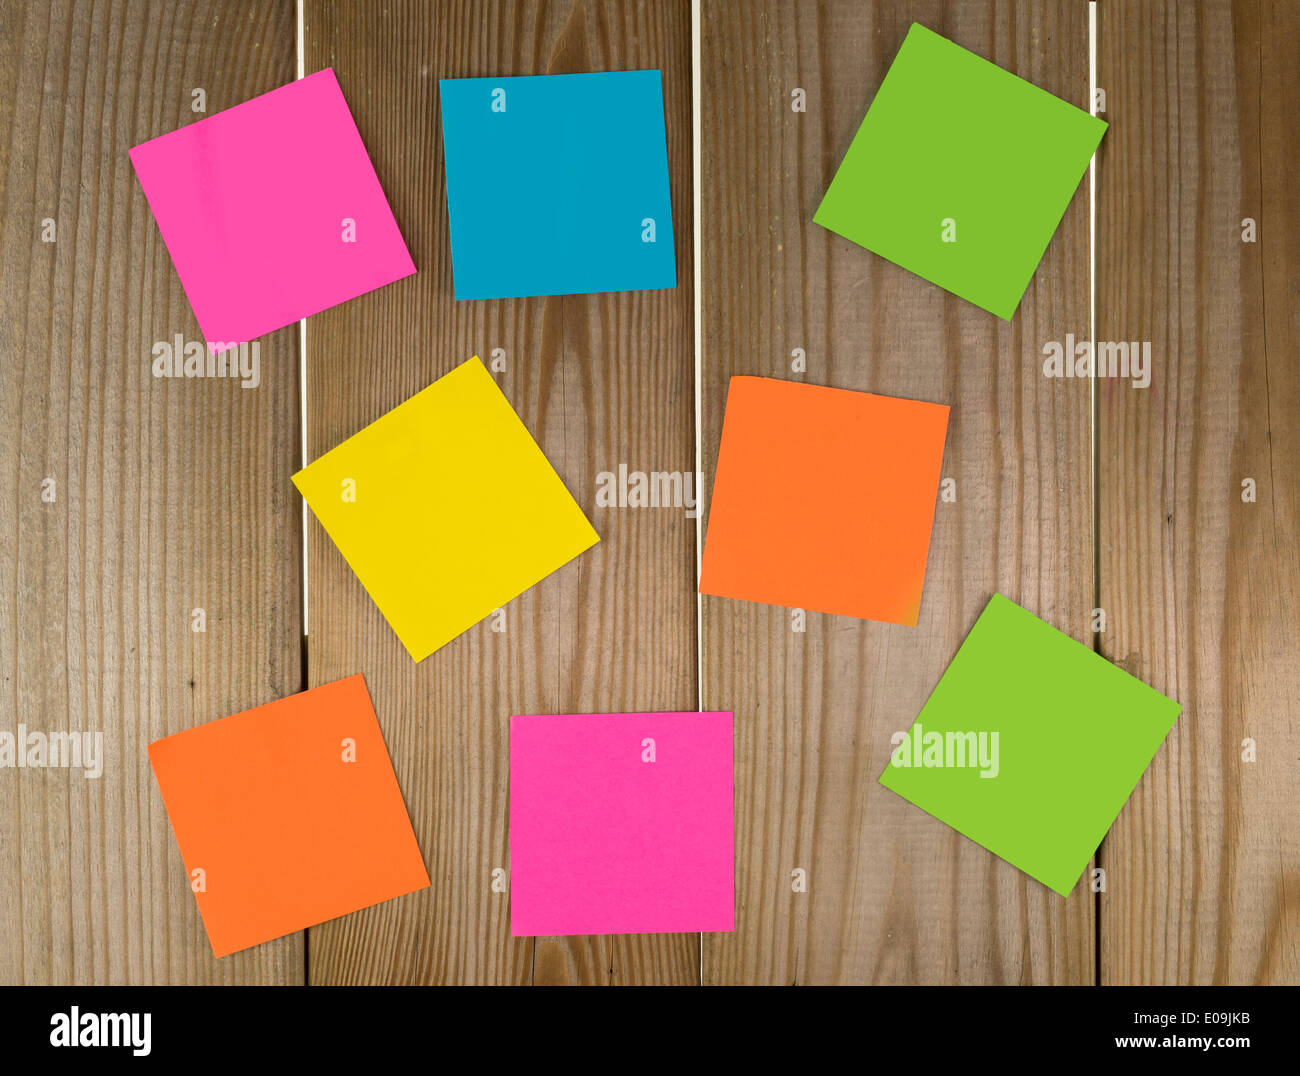 wooden wall with papers in green yellow blue pink and orange Stock Photo